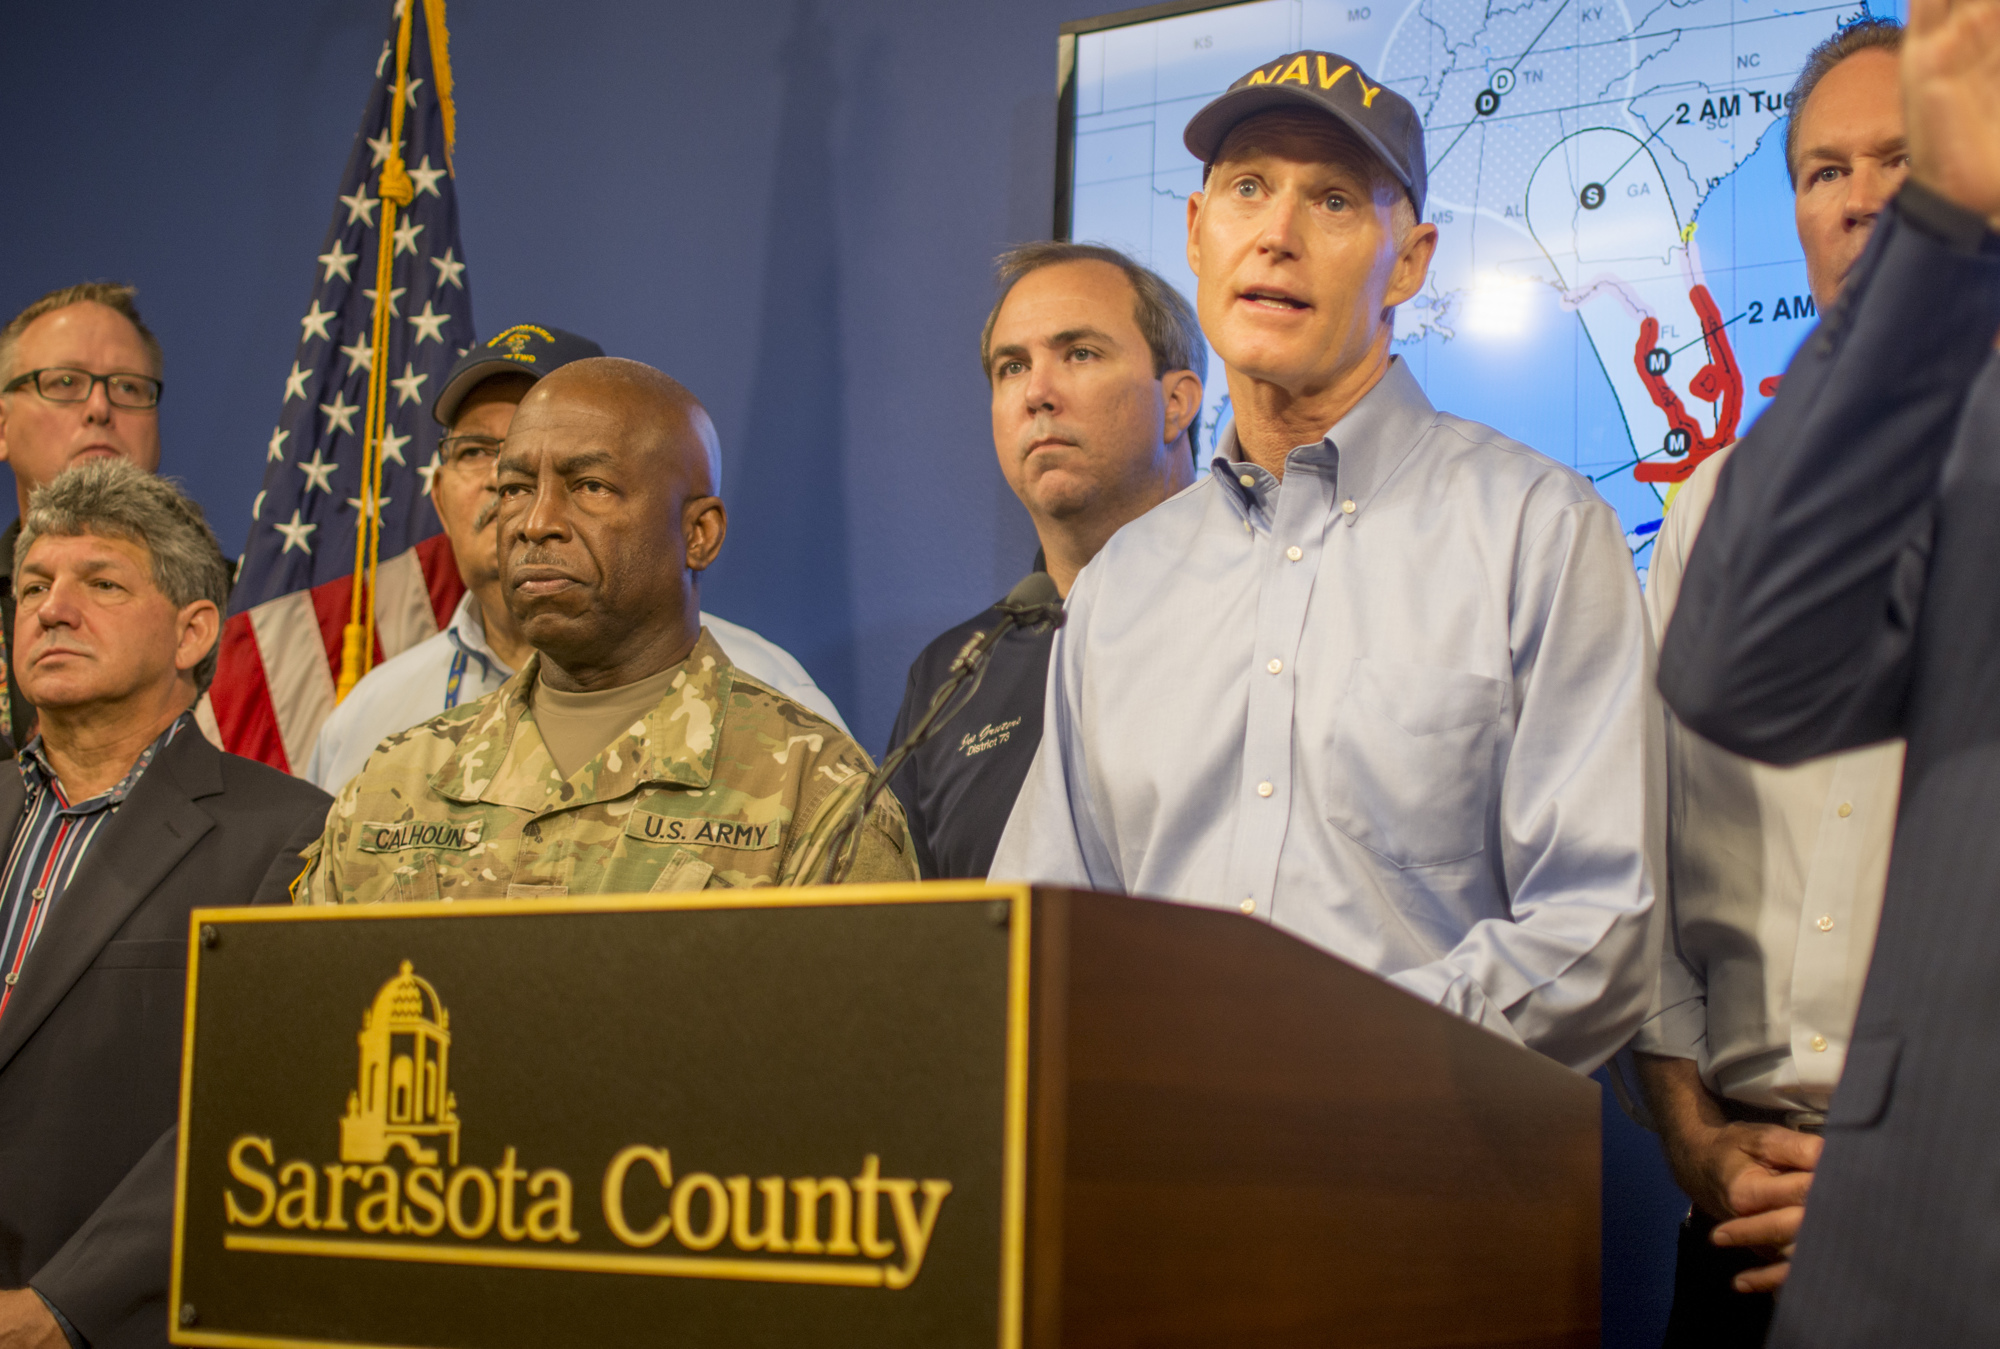 Florida Governor Rick Scott addressed the state Saturday morning from the Sarasota County Emergency Operations Center.